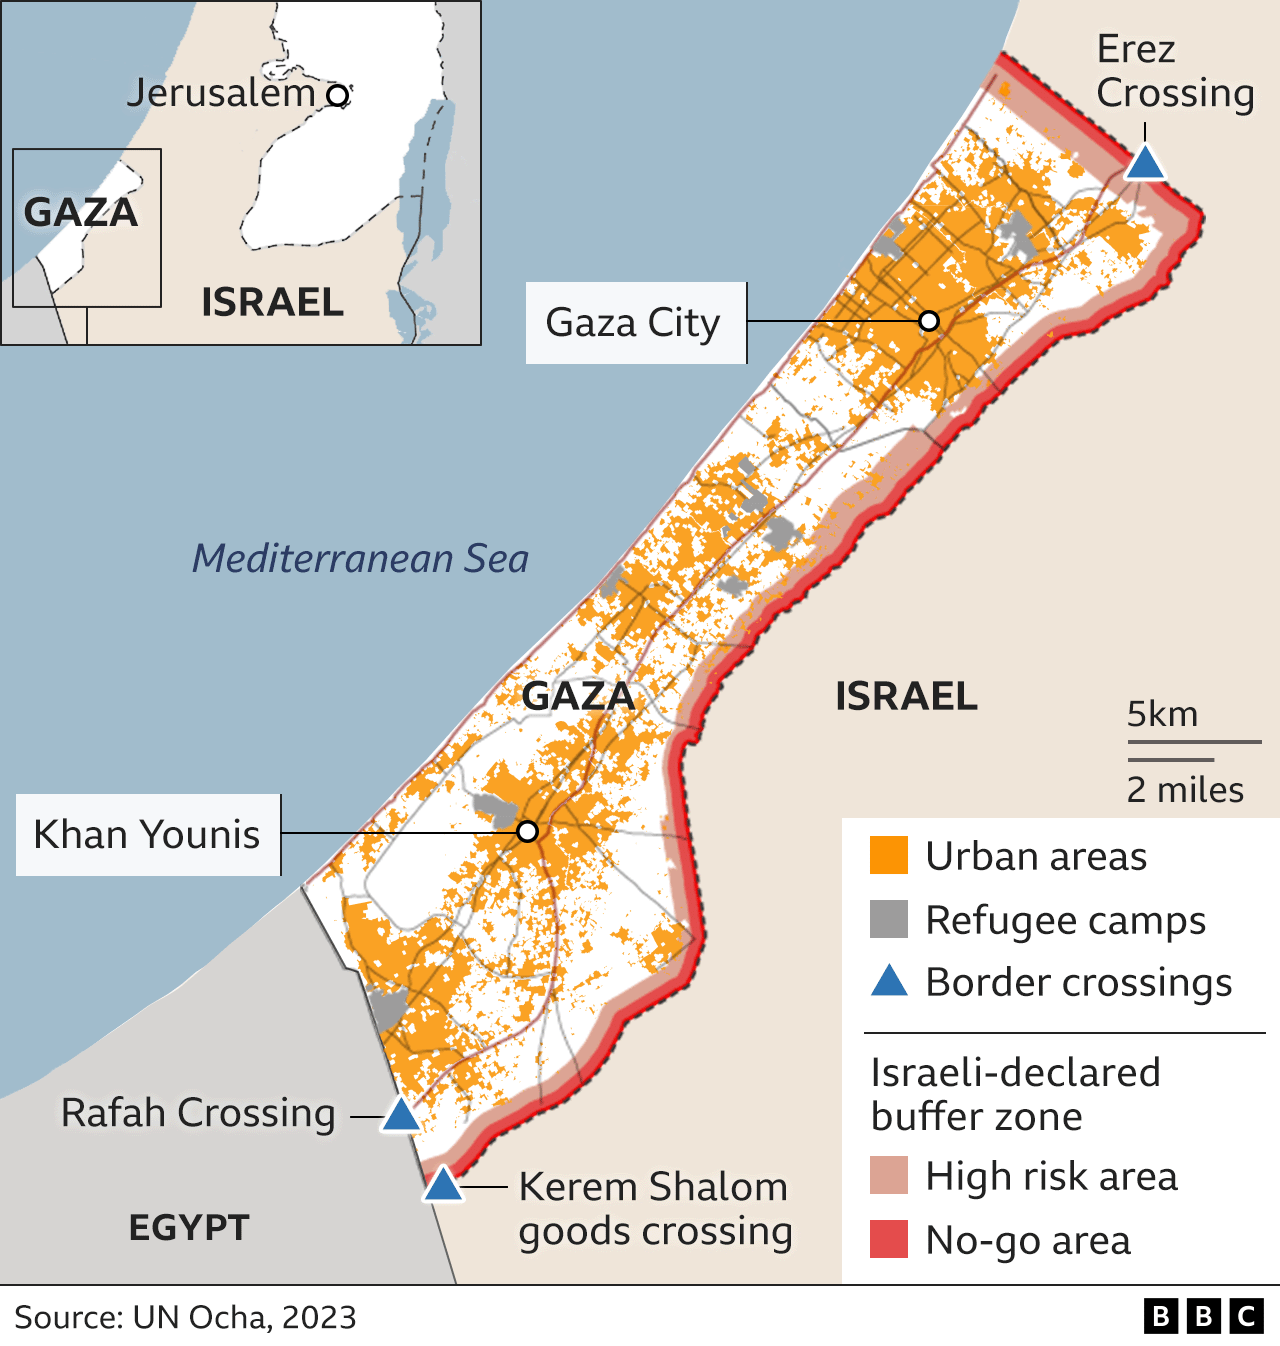 Map of Gaza, showing urban areas, refugee camps and border crossing between Gaza, Israel and Egypt.